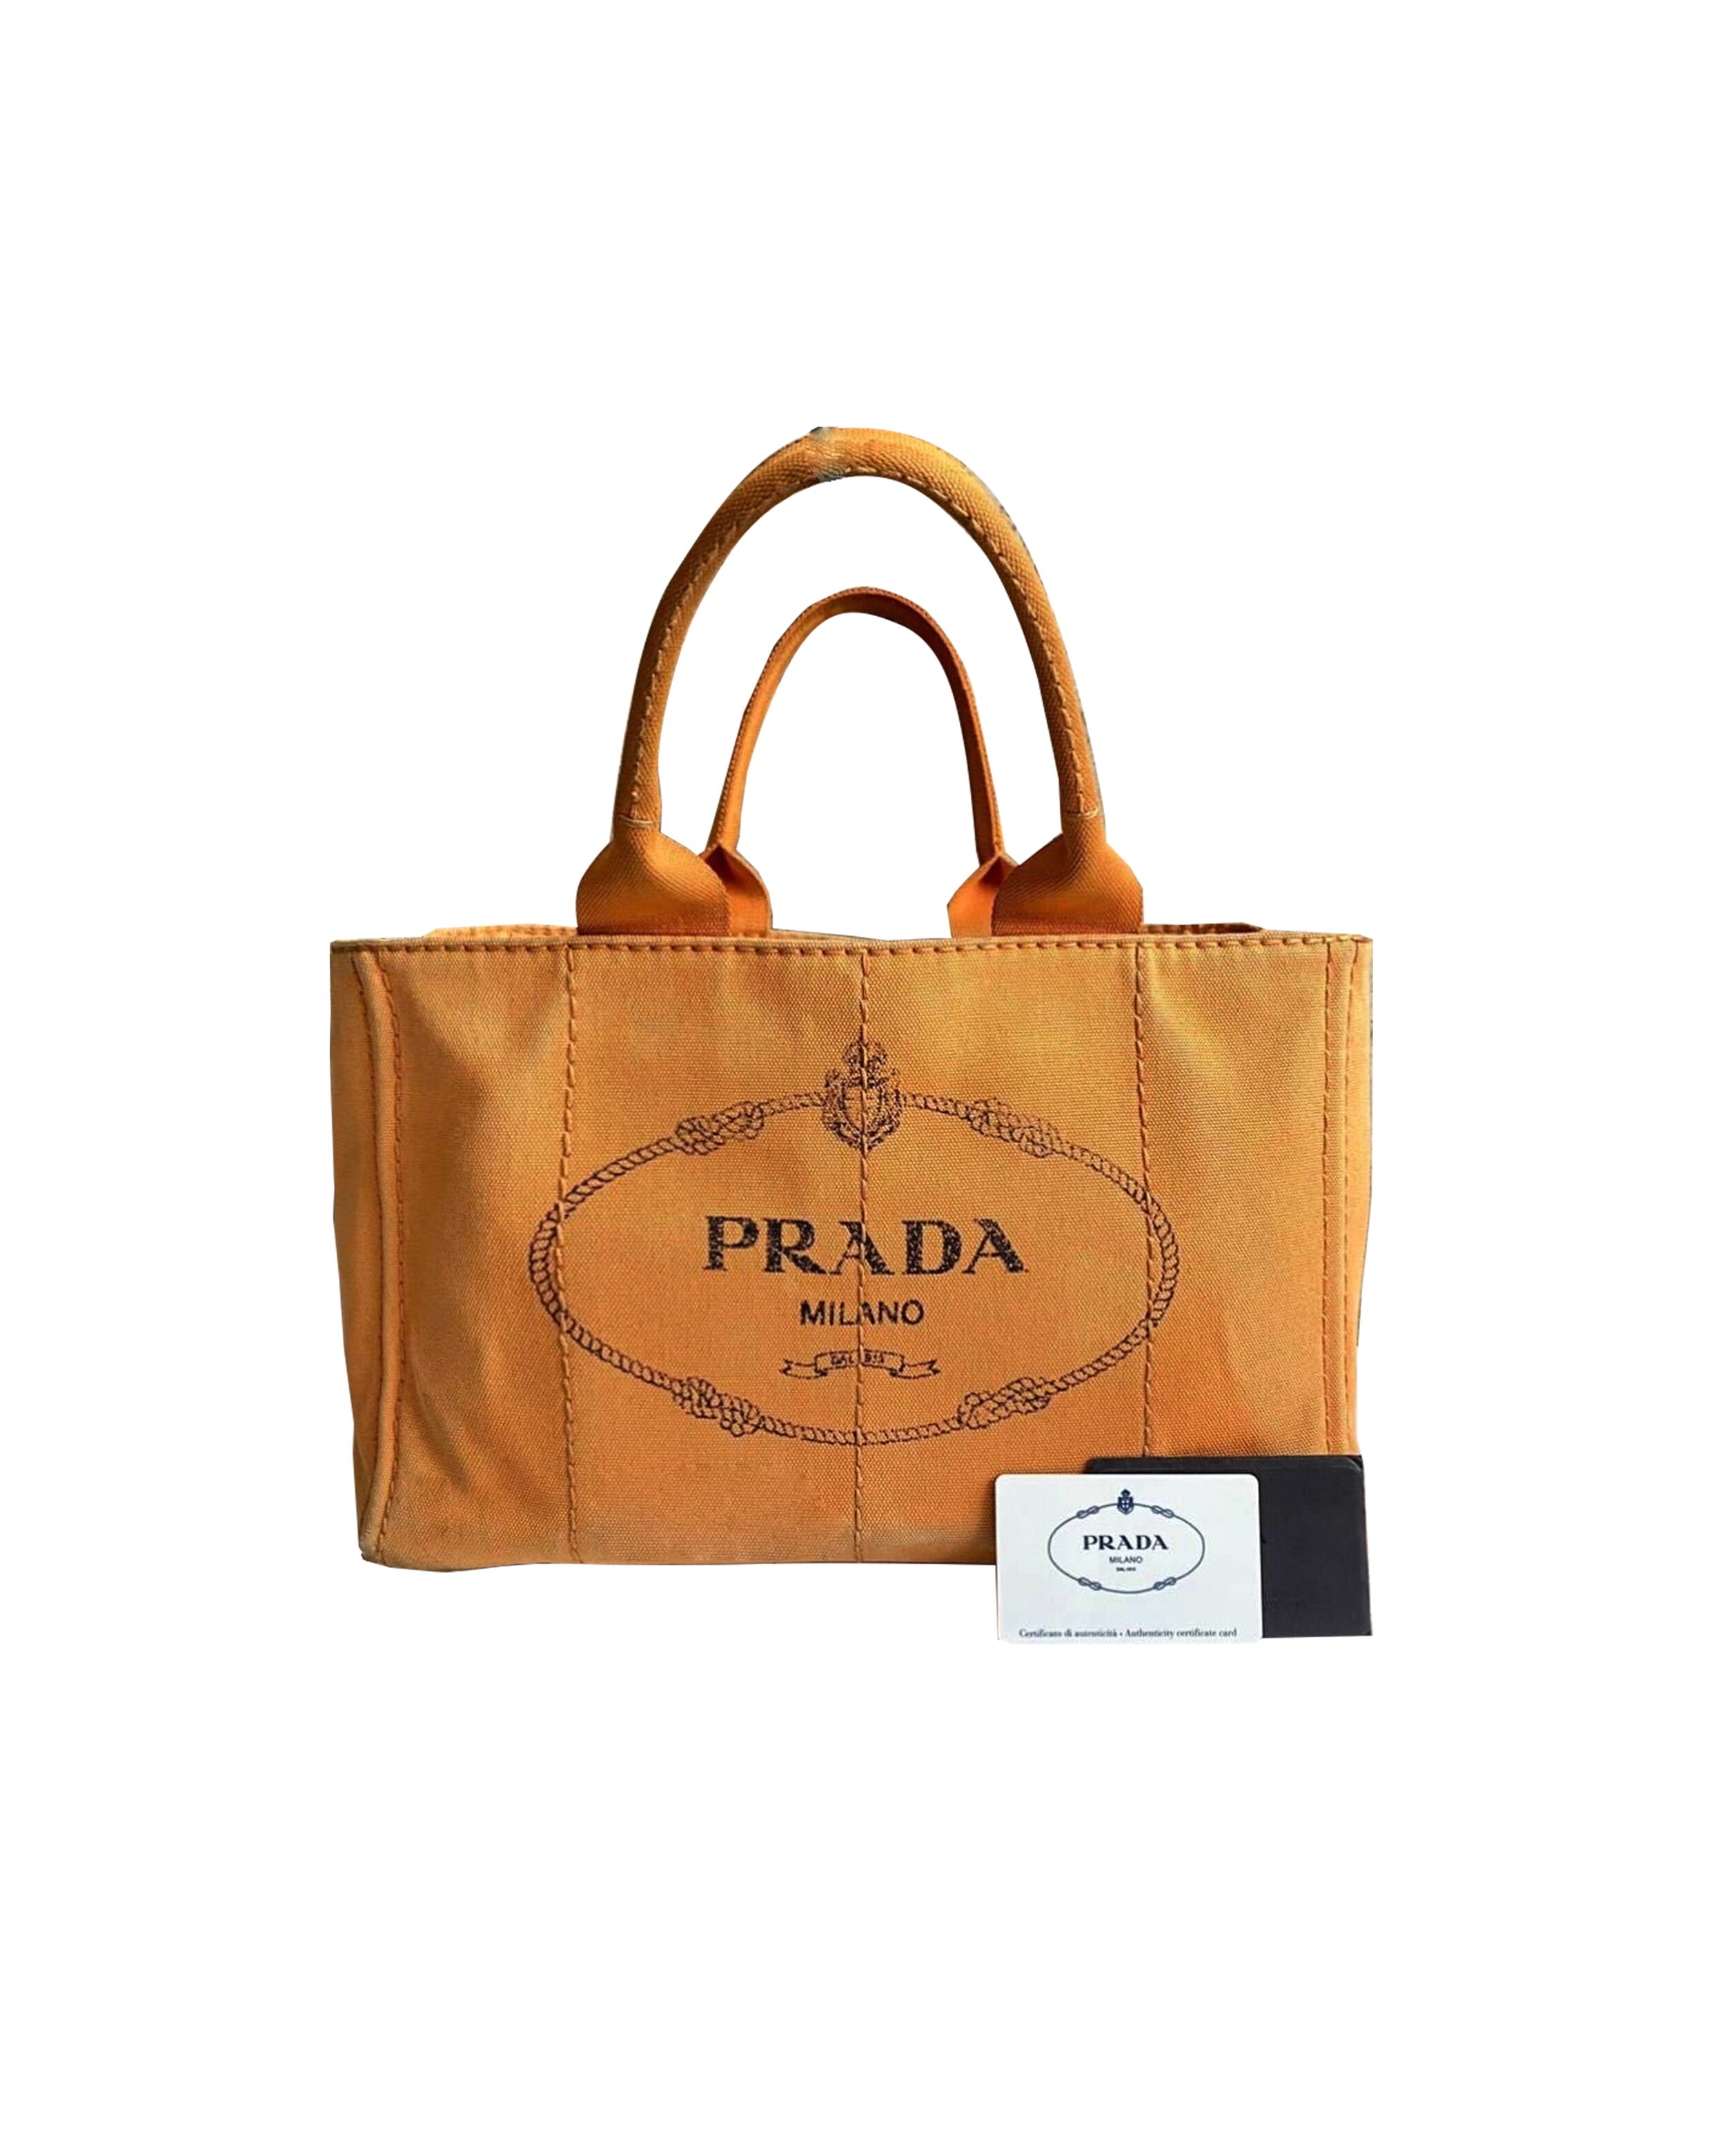 My Other Bags are Prada …  My other bag, Bags, Canvas bag design